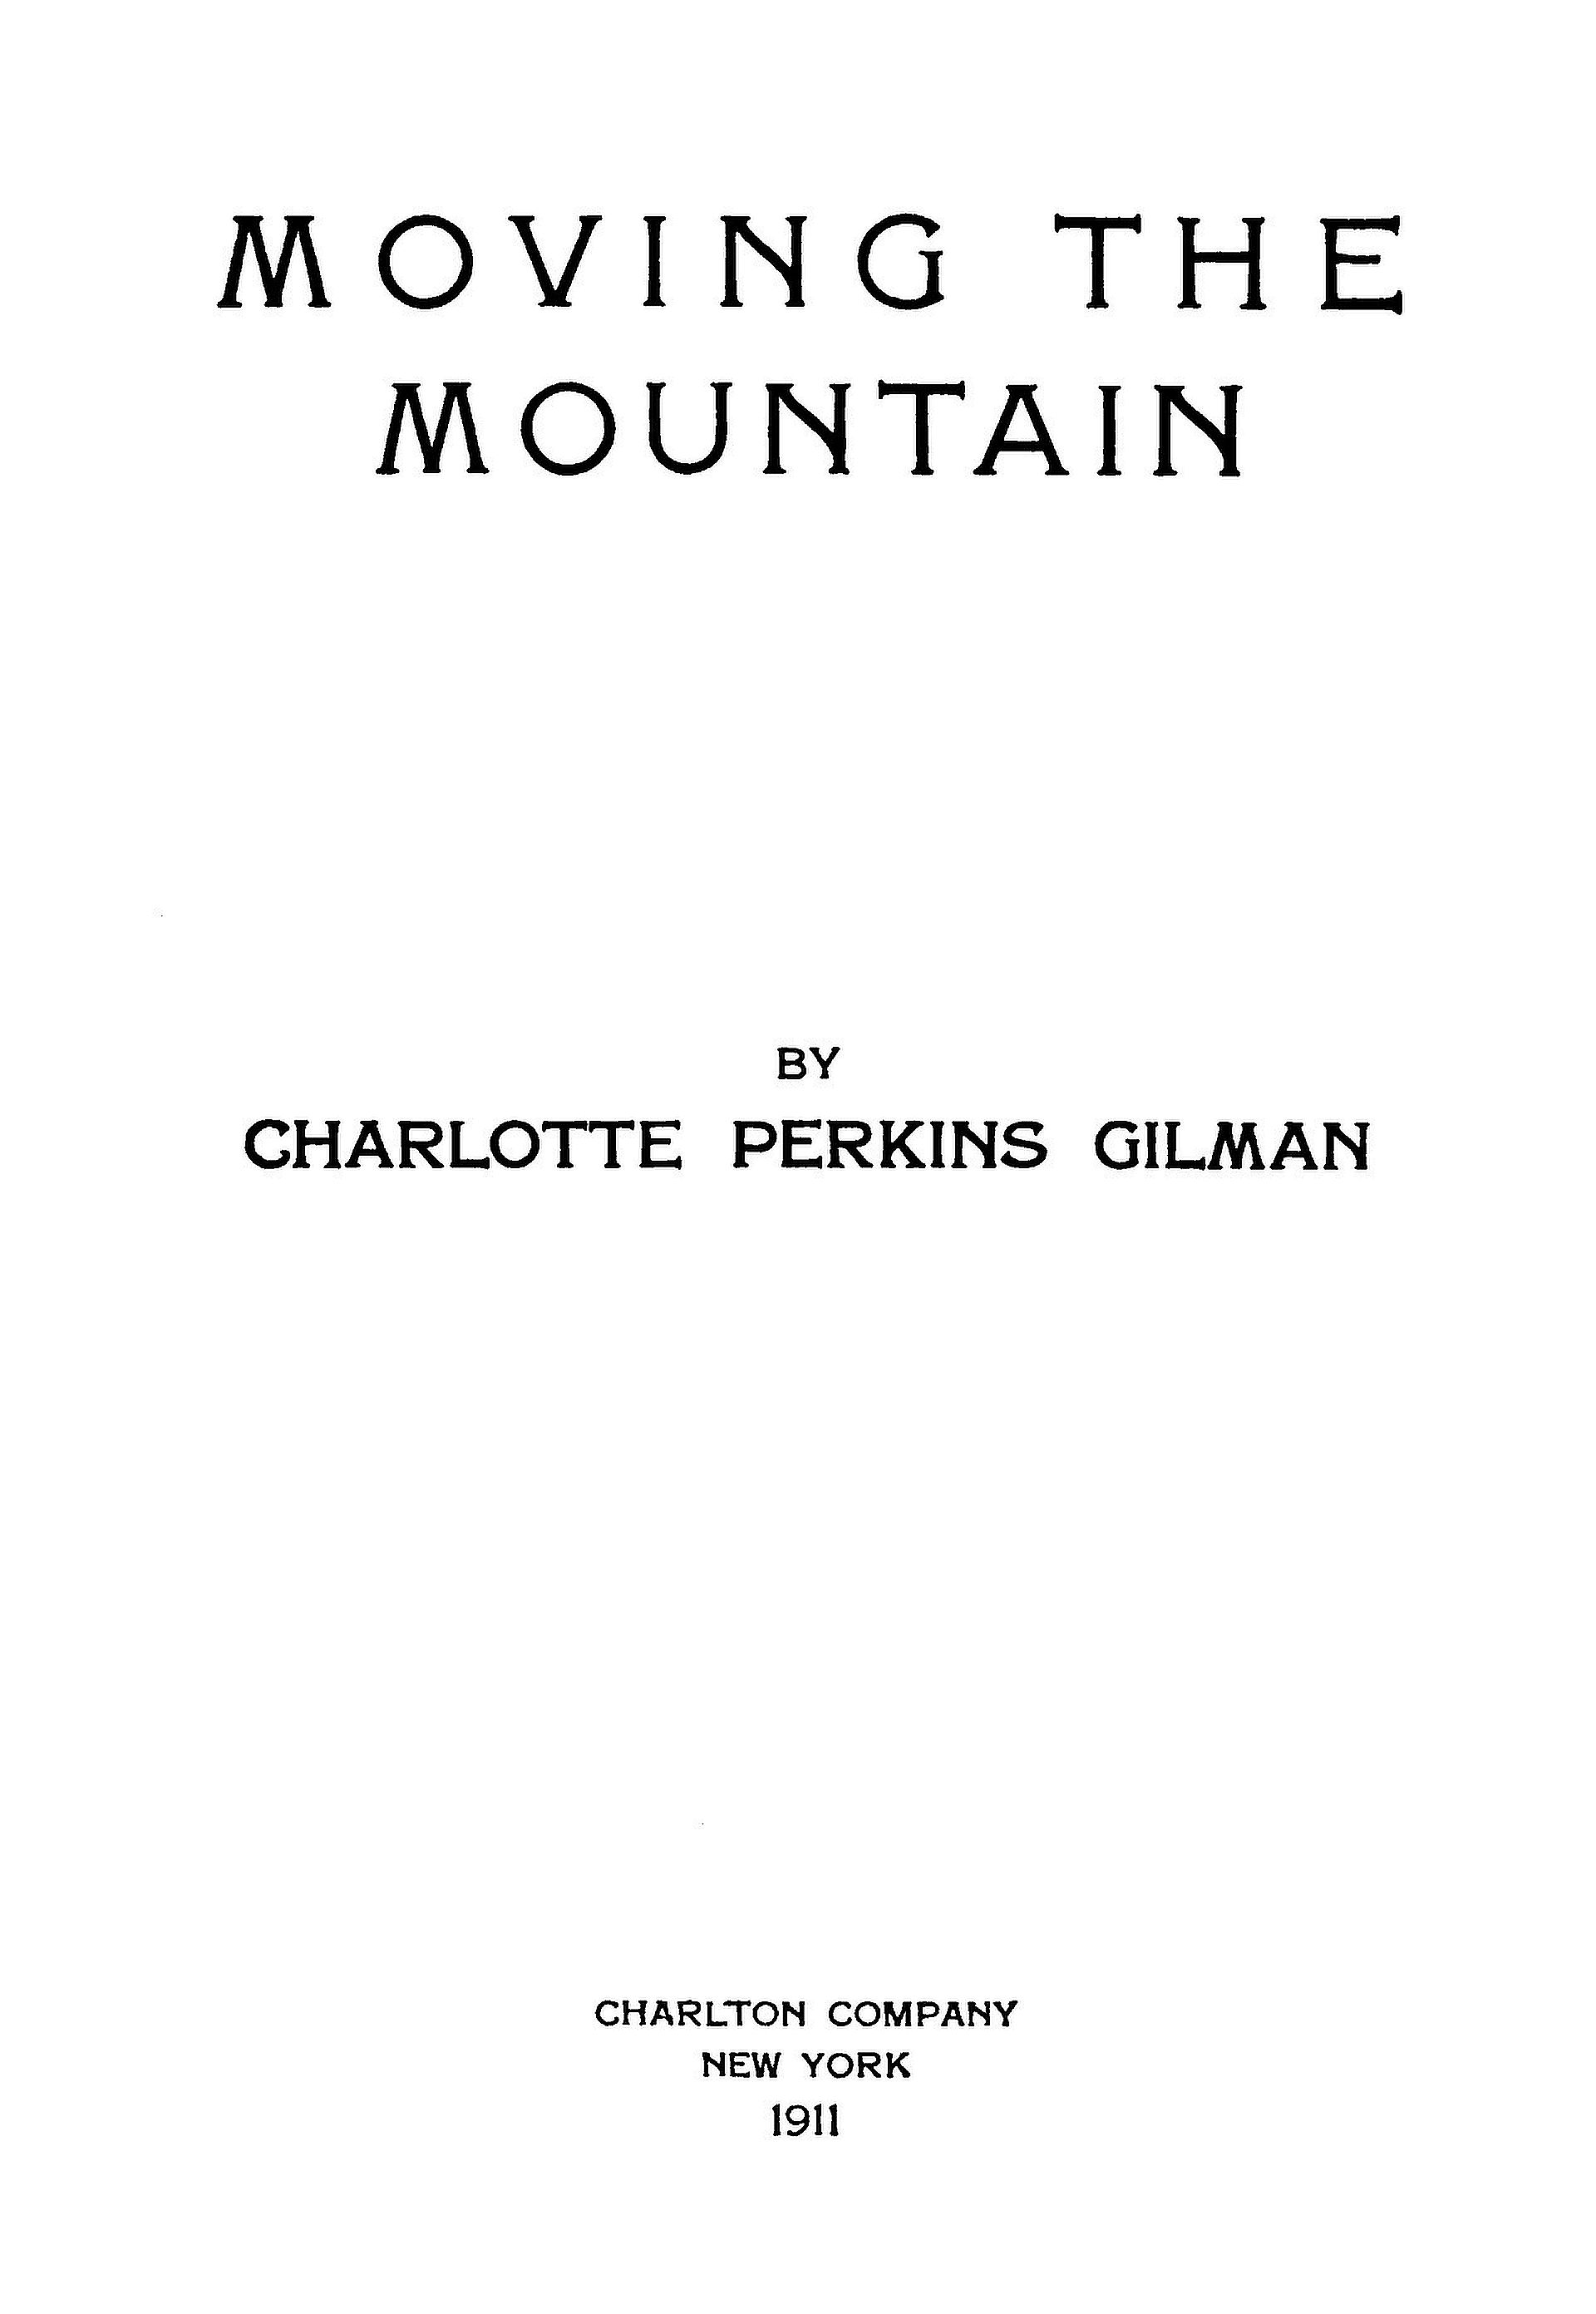 The Project Gutenberg eBook of Moving the Mountain, by Charlotte Perkins Gilman. picture picture